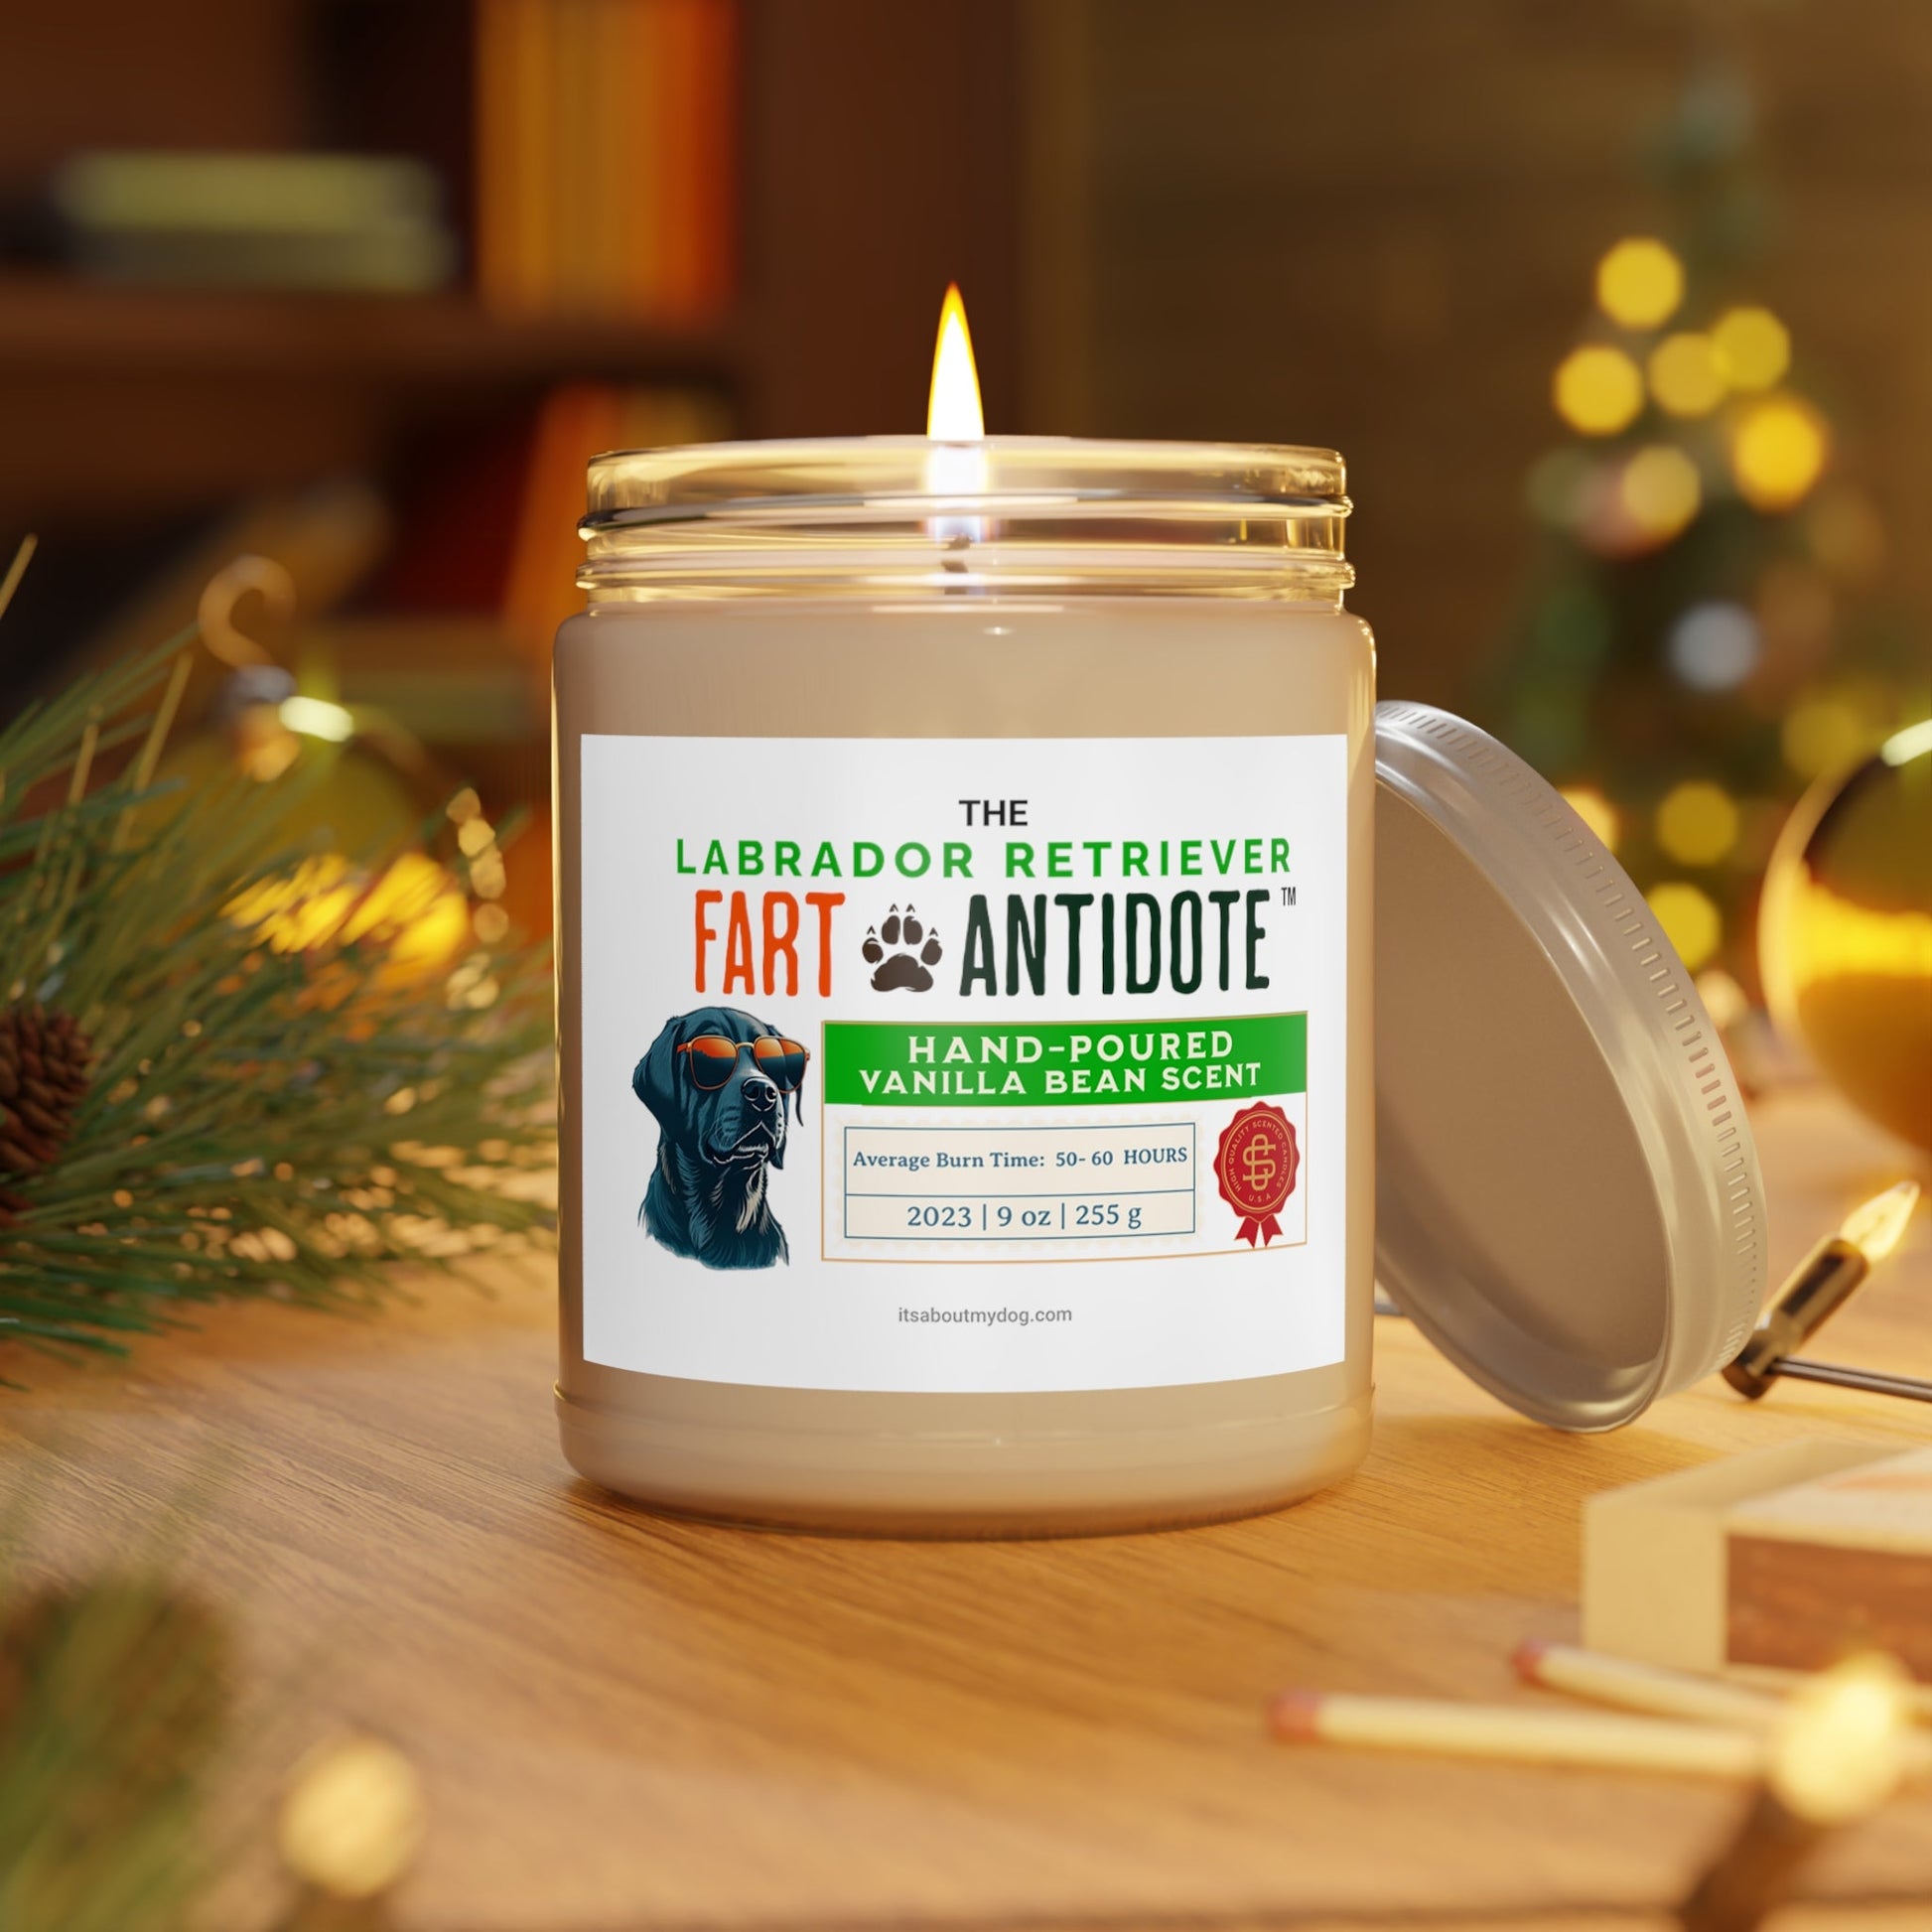 Labrador Retriever-Vanilla Bean,Scented Candles, 9oz27.99-(FREE Delivery) Shop now at itsaboutmydog.com, Assembled in the USA, Assembled in USA, Bio, Decor, Eco-friendly, Home & Living, Home Decor, Made in the USA, Made in USA, Seasonal Picks